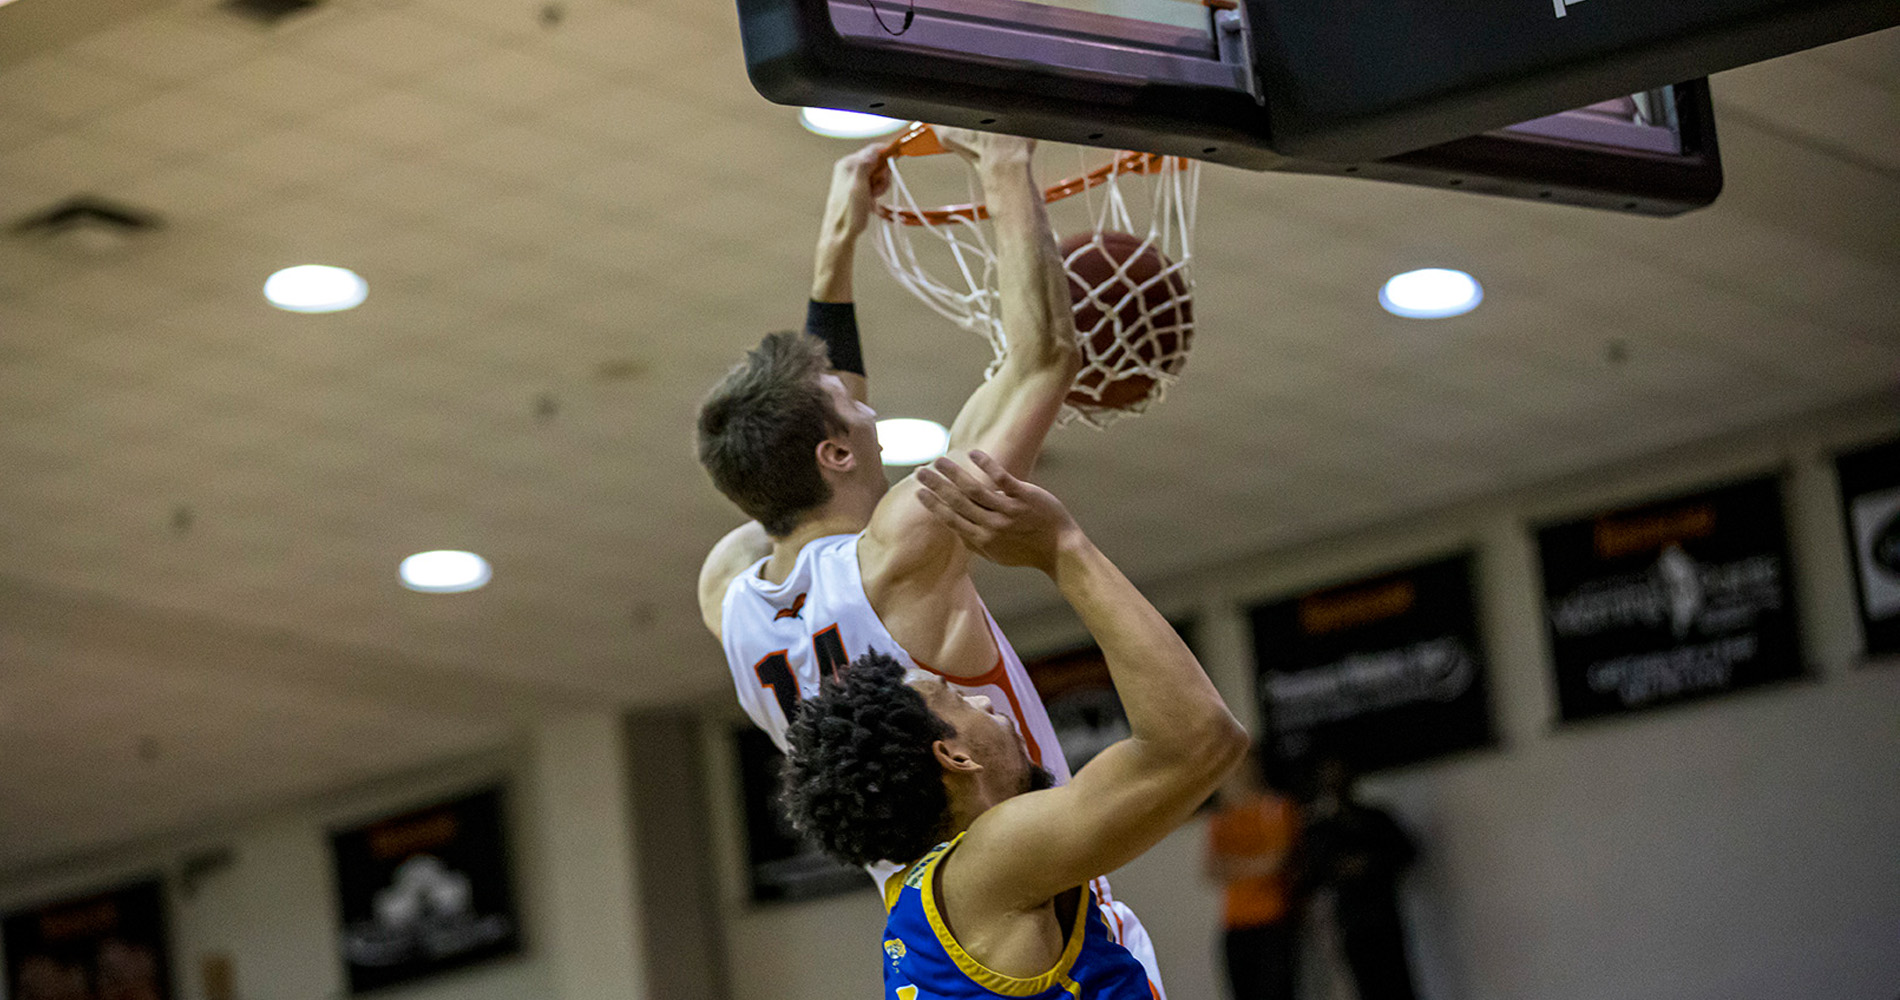 Caleb Hodnett slams this dunk home in Tusculum's 80-66 home win over Mars Hill (photo by Chuck Williams)